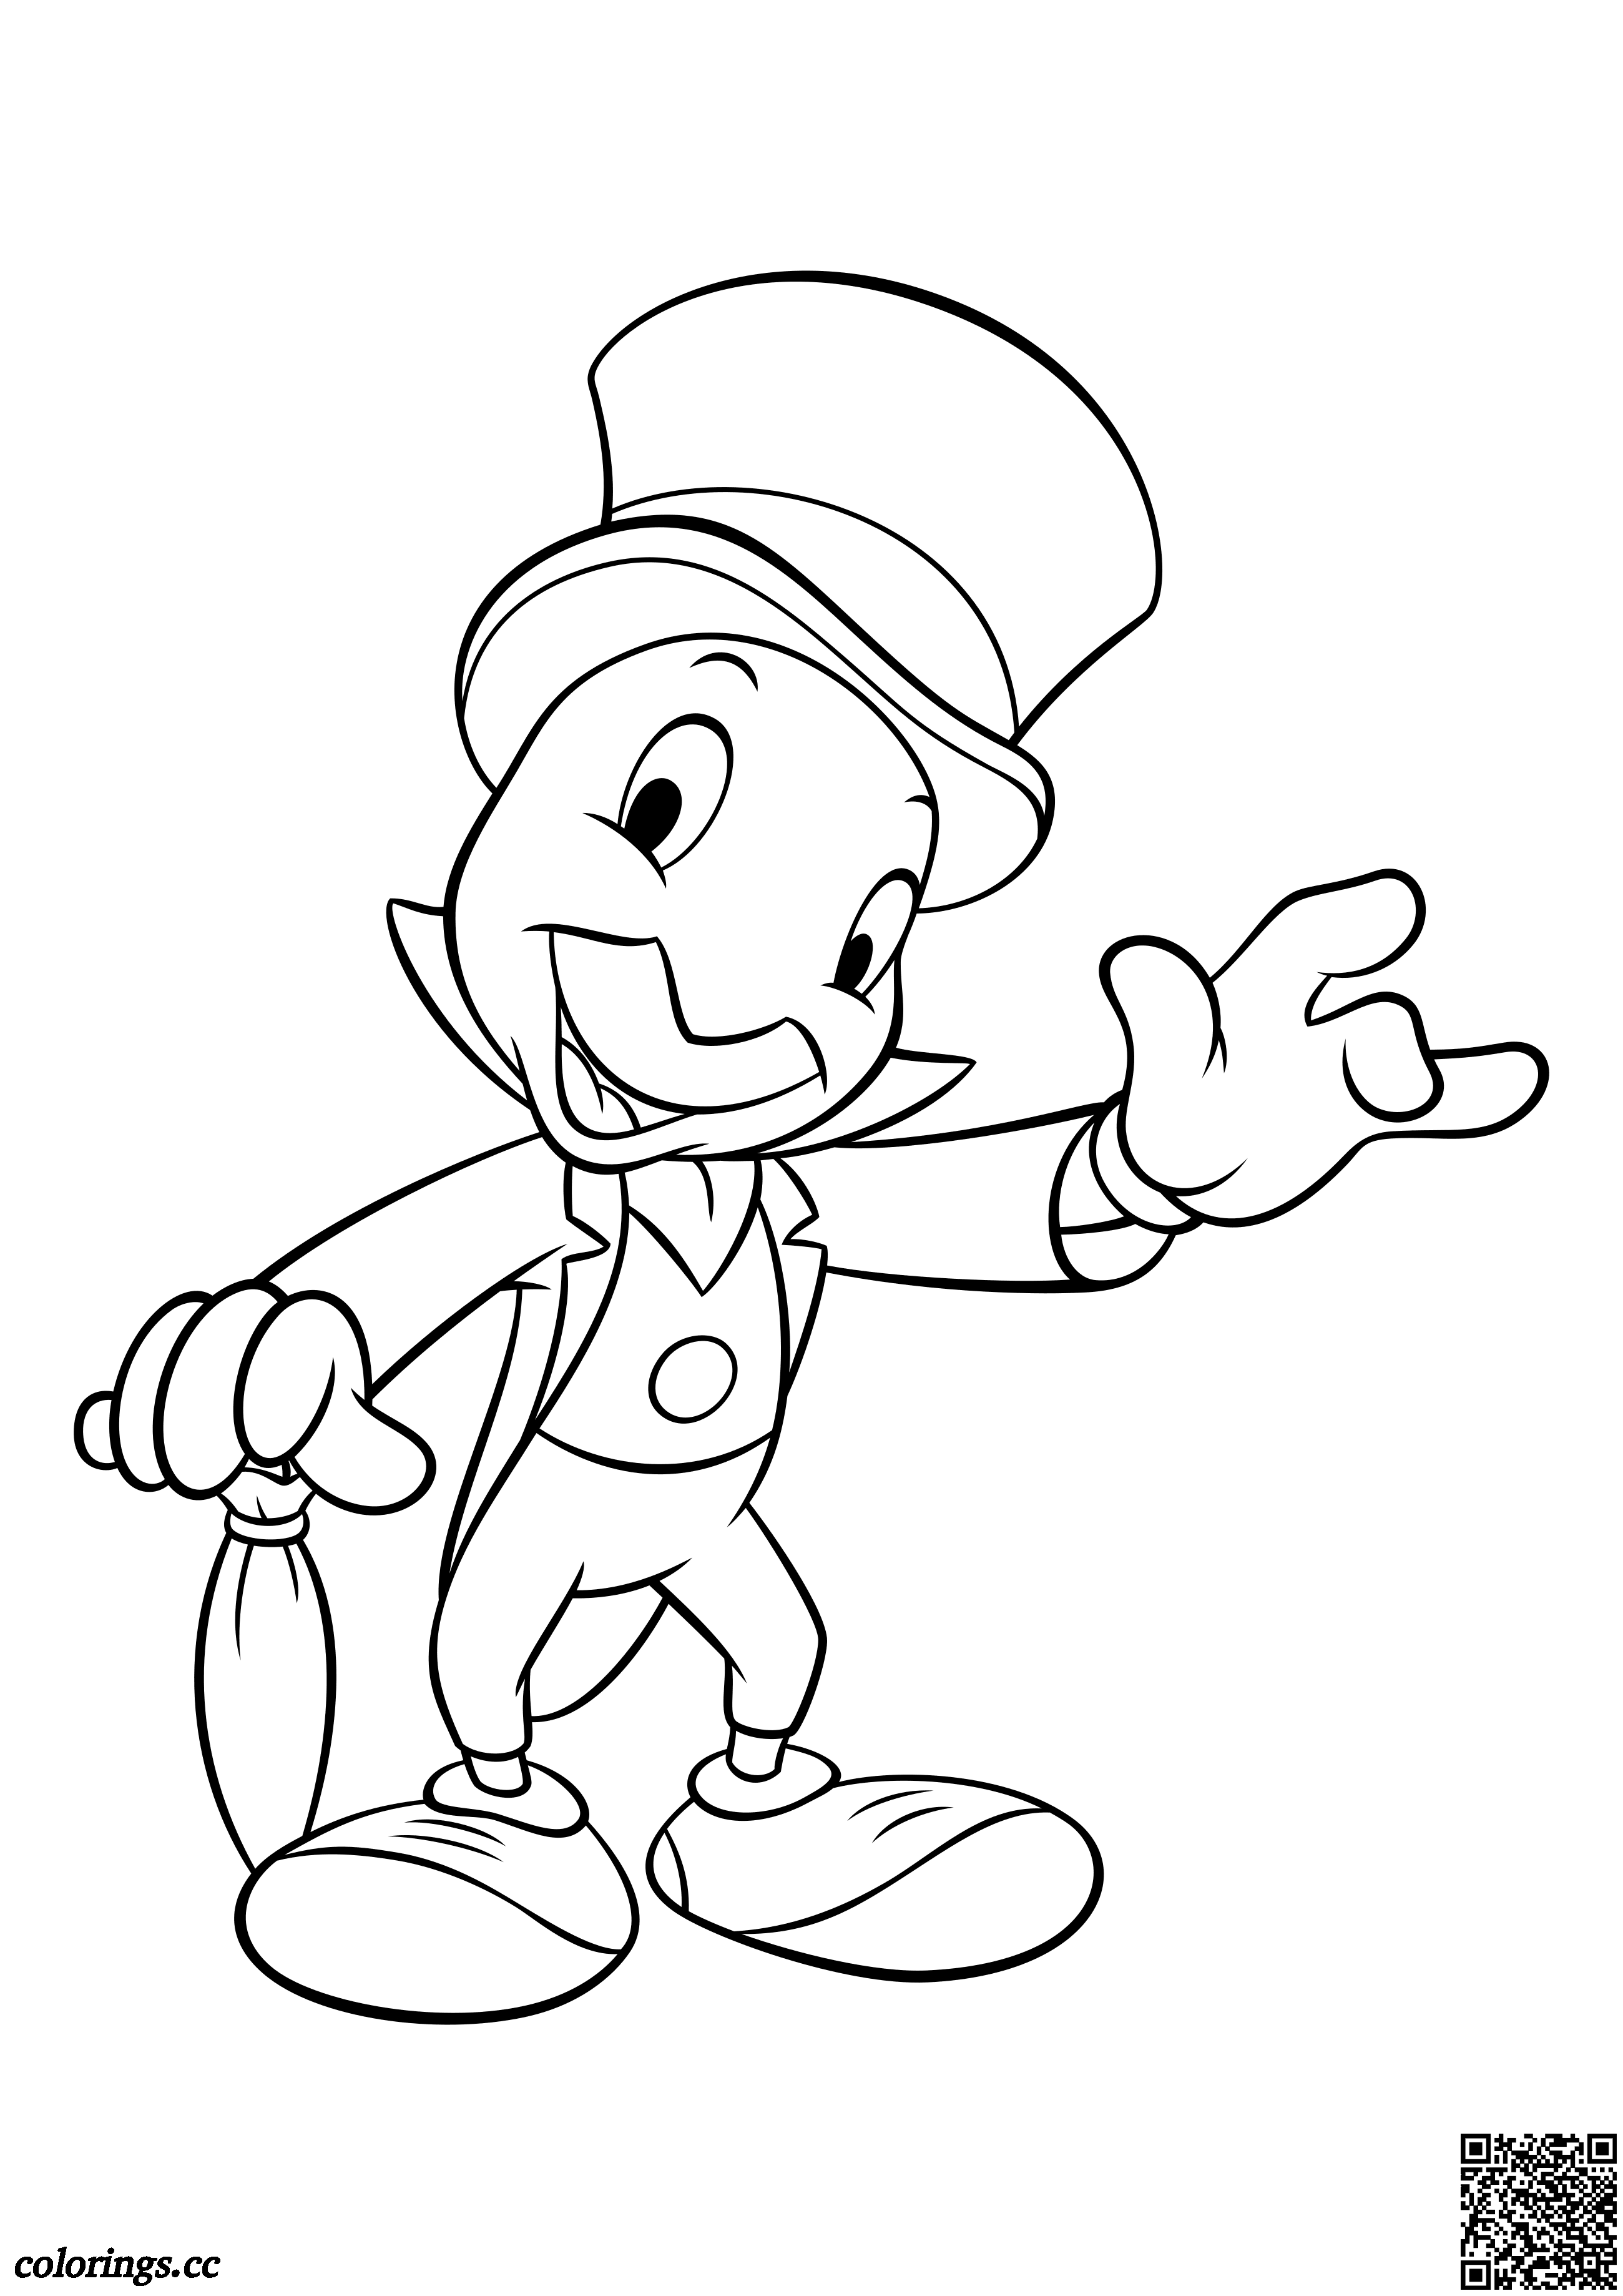 Pinocchio And Jiminy Cricket Coloring Pages